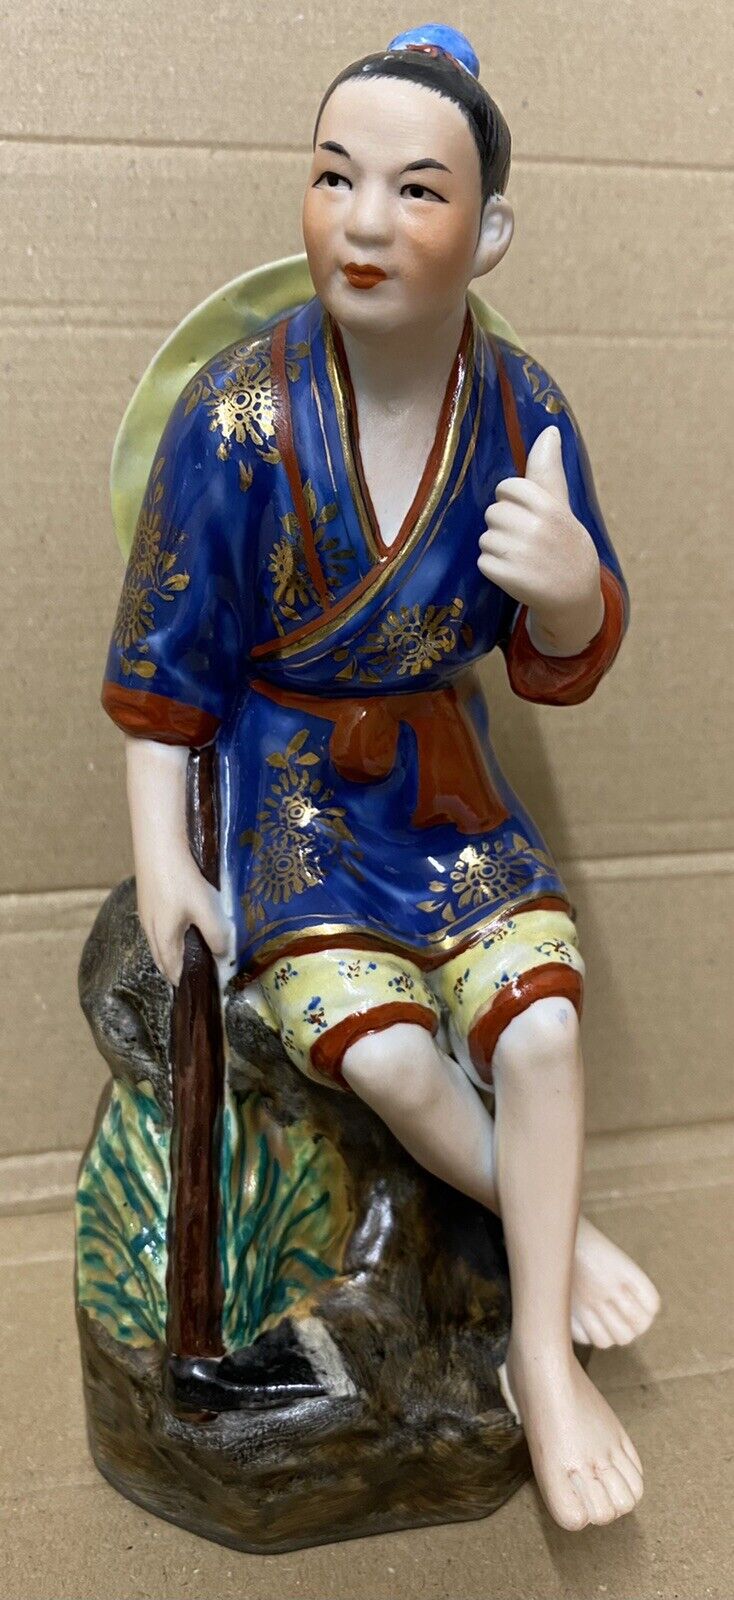 Antique Valuations: Chinese Jingdezhen Figurine - Mid 20th Century